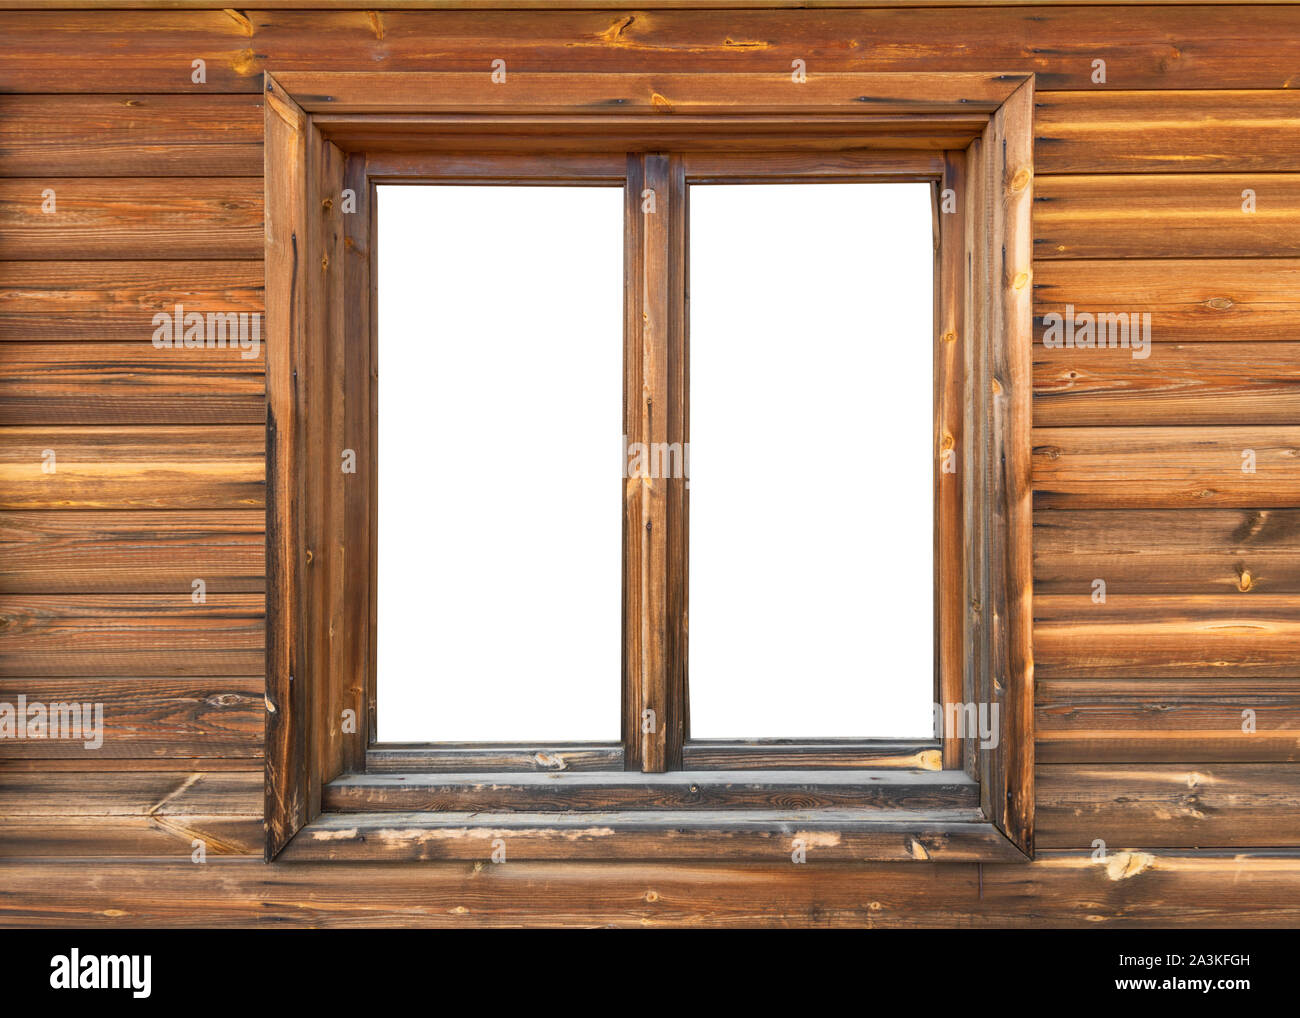 Wooden window in a wooden wall of logs Stock Photo